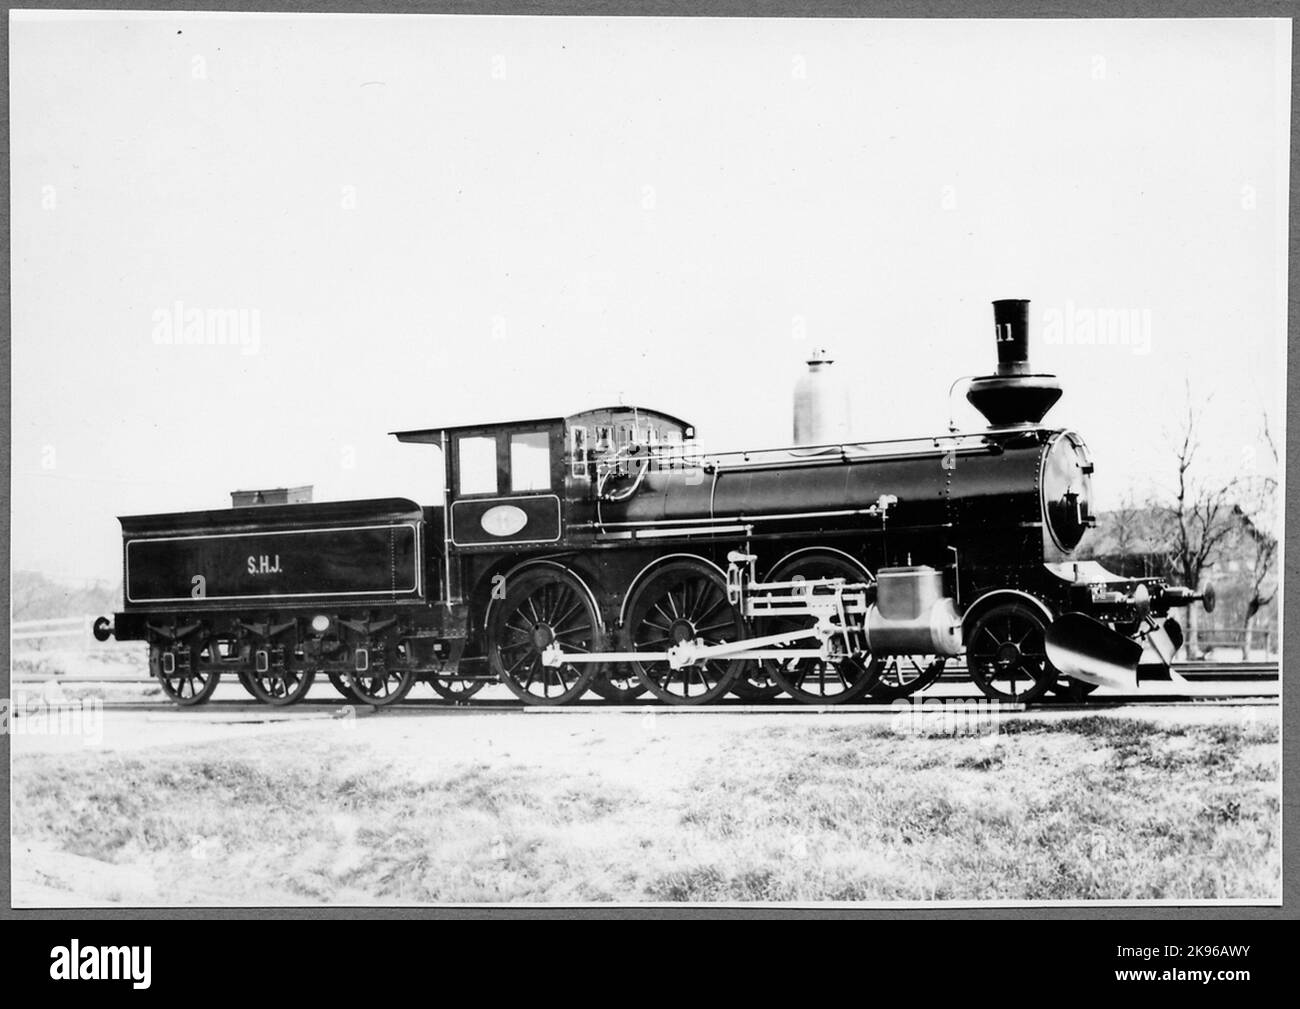 Delivery photo, Skåne Halaland Railway, Shj Lok 11, manufactured in 1891 by Nohab. In 1896, the locomotive was sold to the State Railways and got Littera SJ VKBG 495. Stock Photo